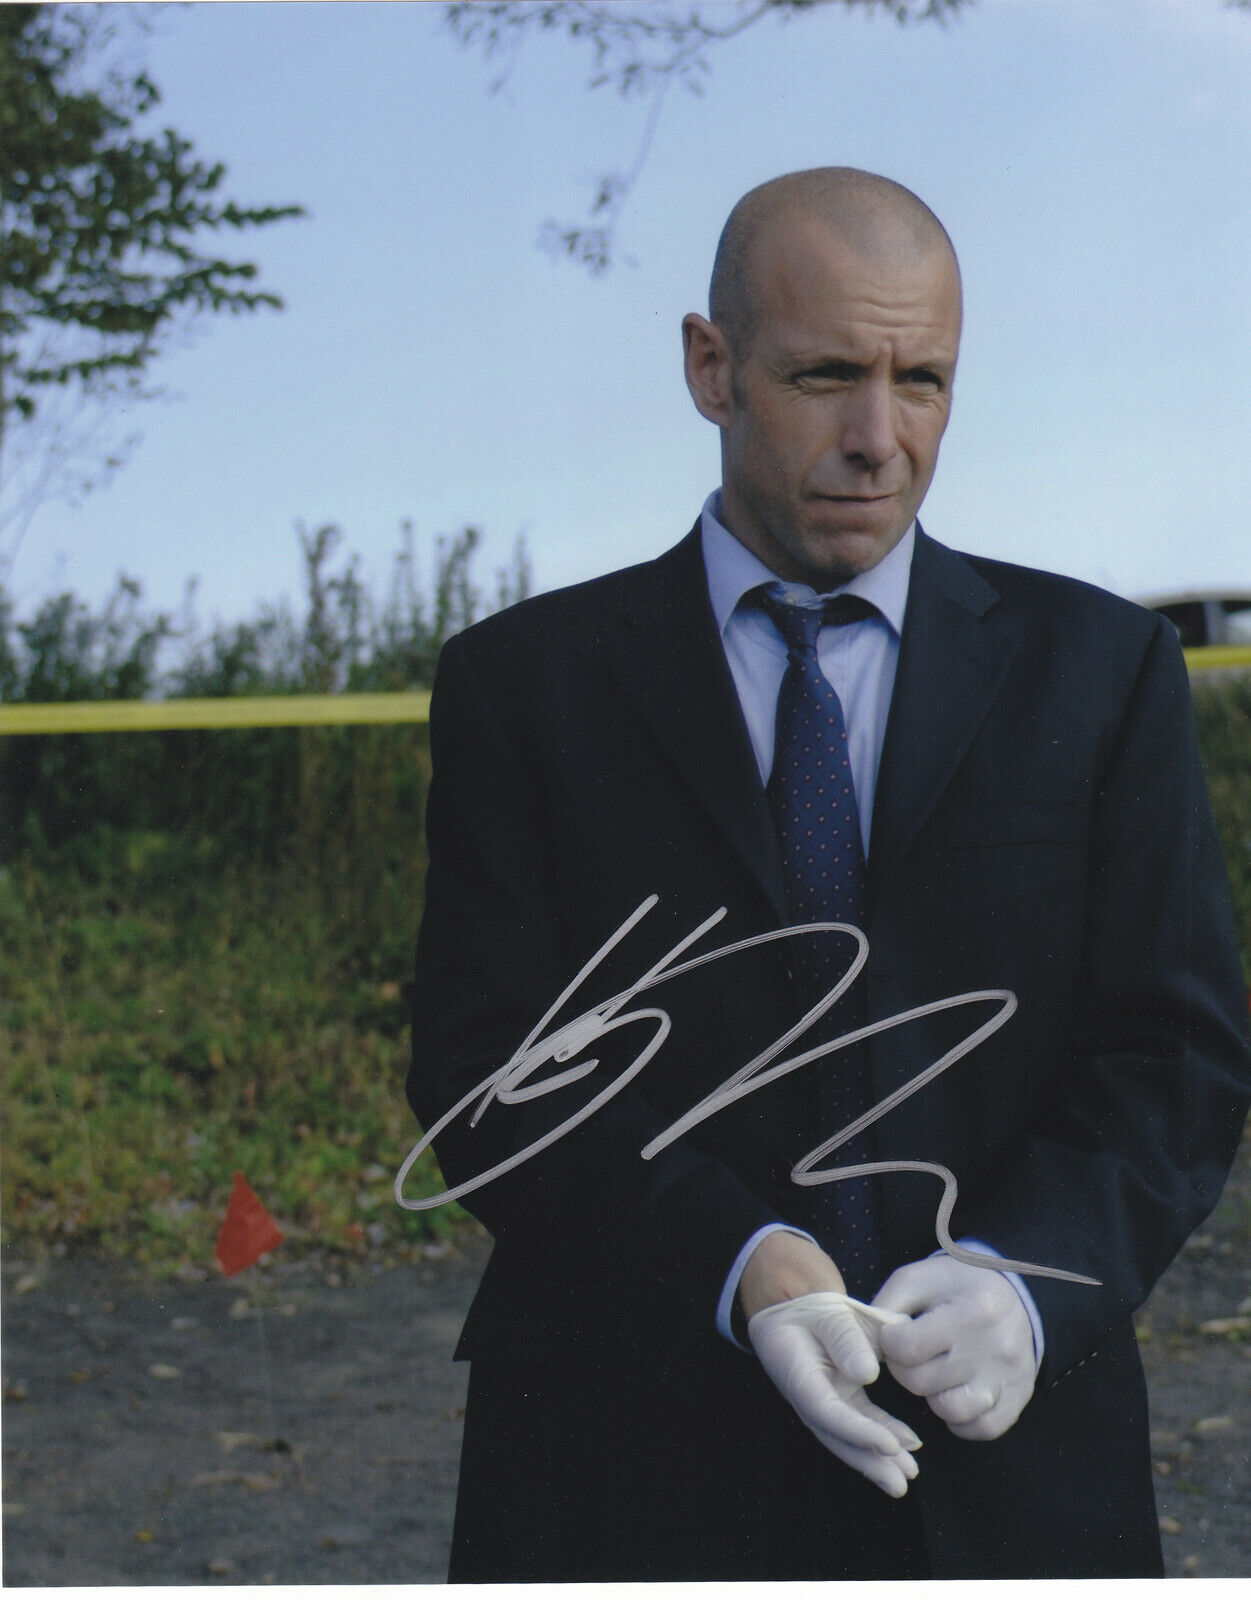 HUGH DILLON SIGNED AUTOGRAPH DURHAM COUNTY HEADSTONES 8X10 Photo Poster painting PROOF